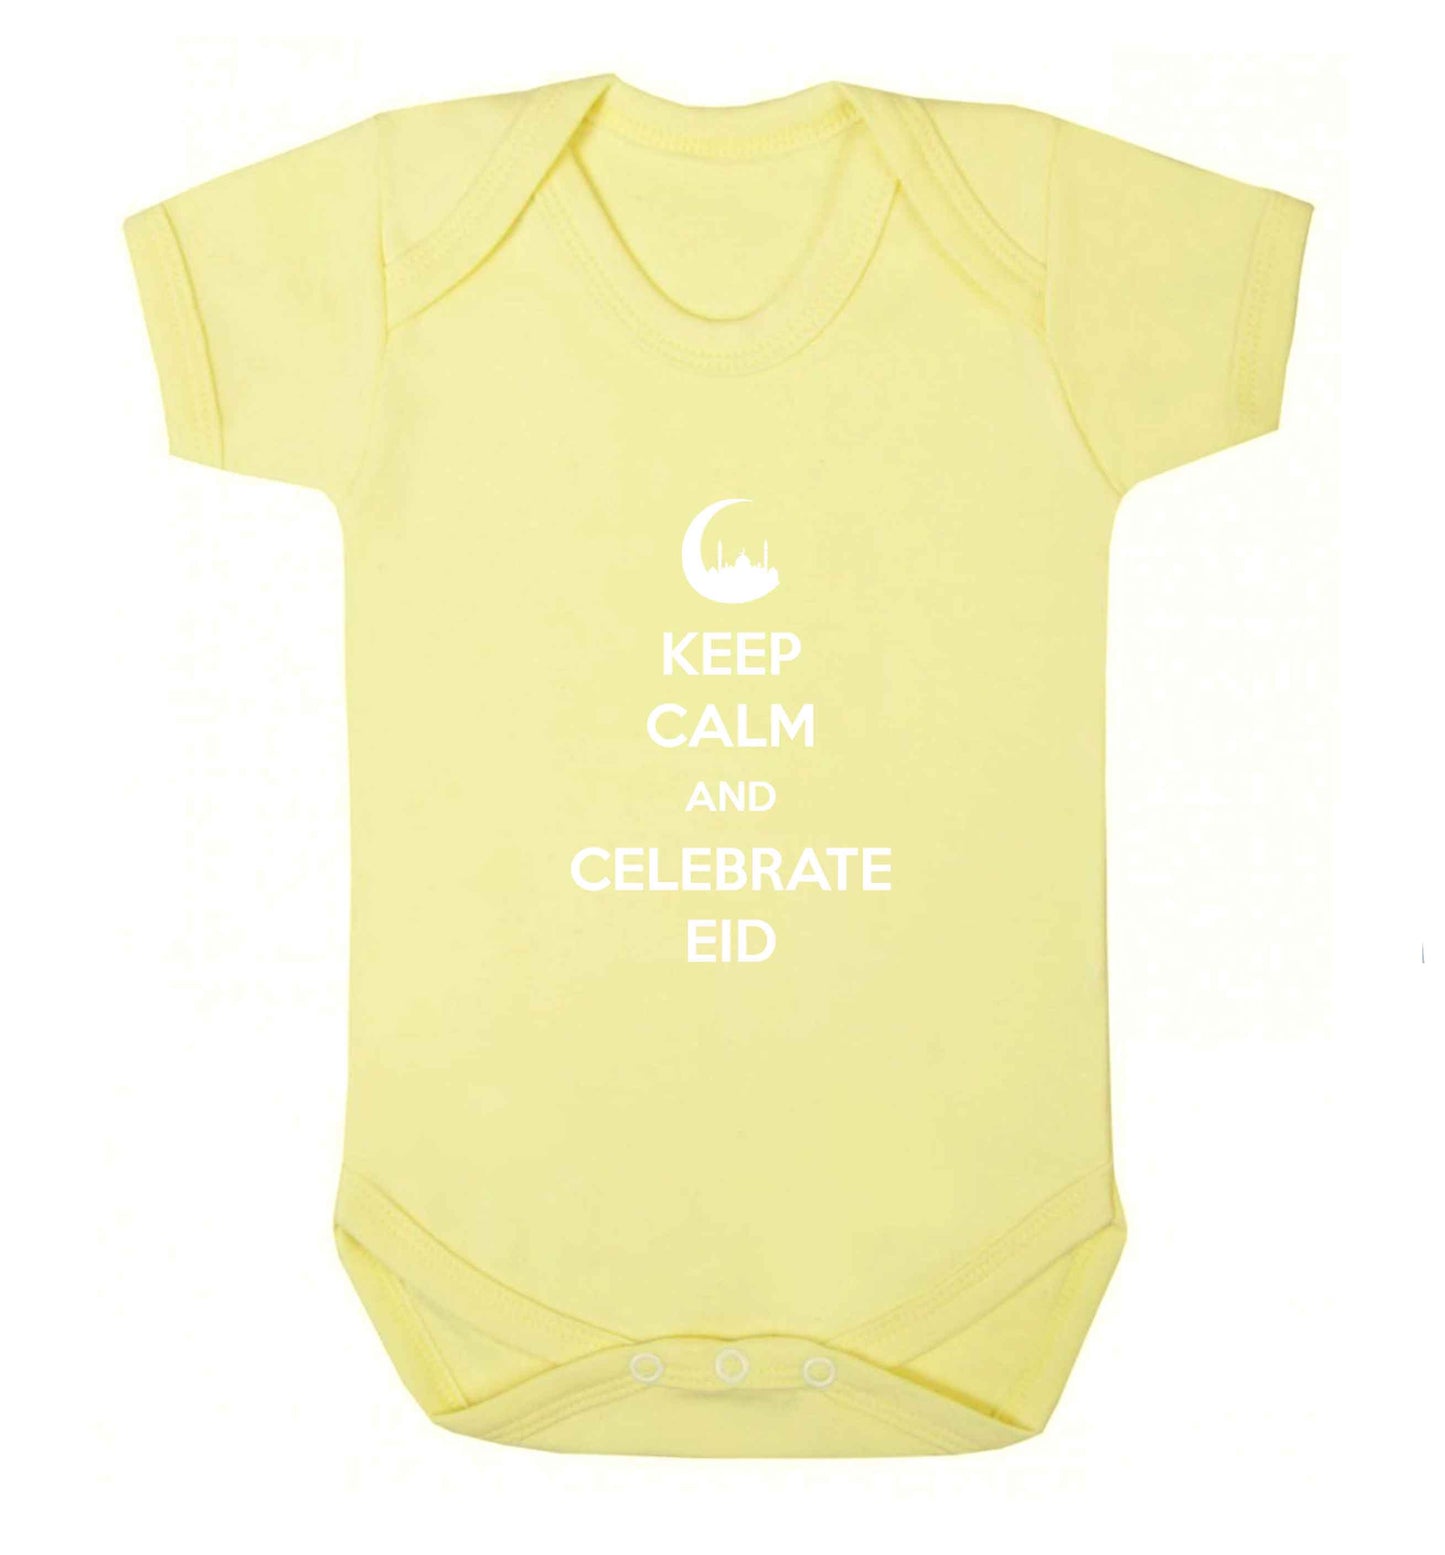 Keep calm and celebrate Eid baby vest pale yellow 18-24 months